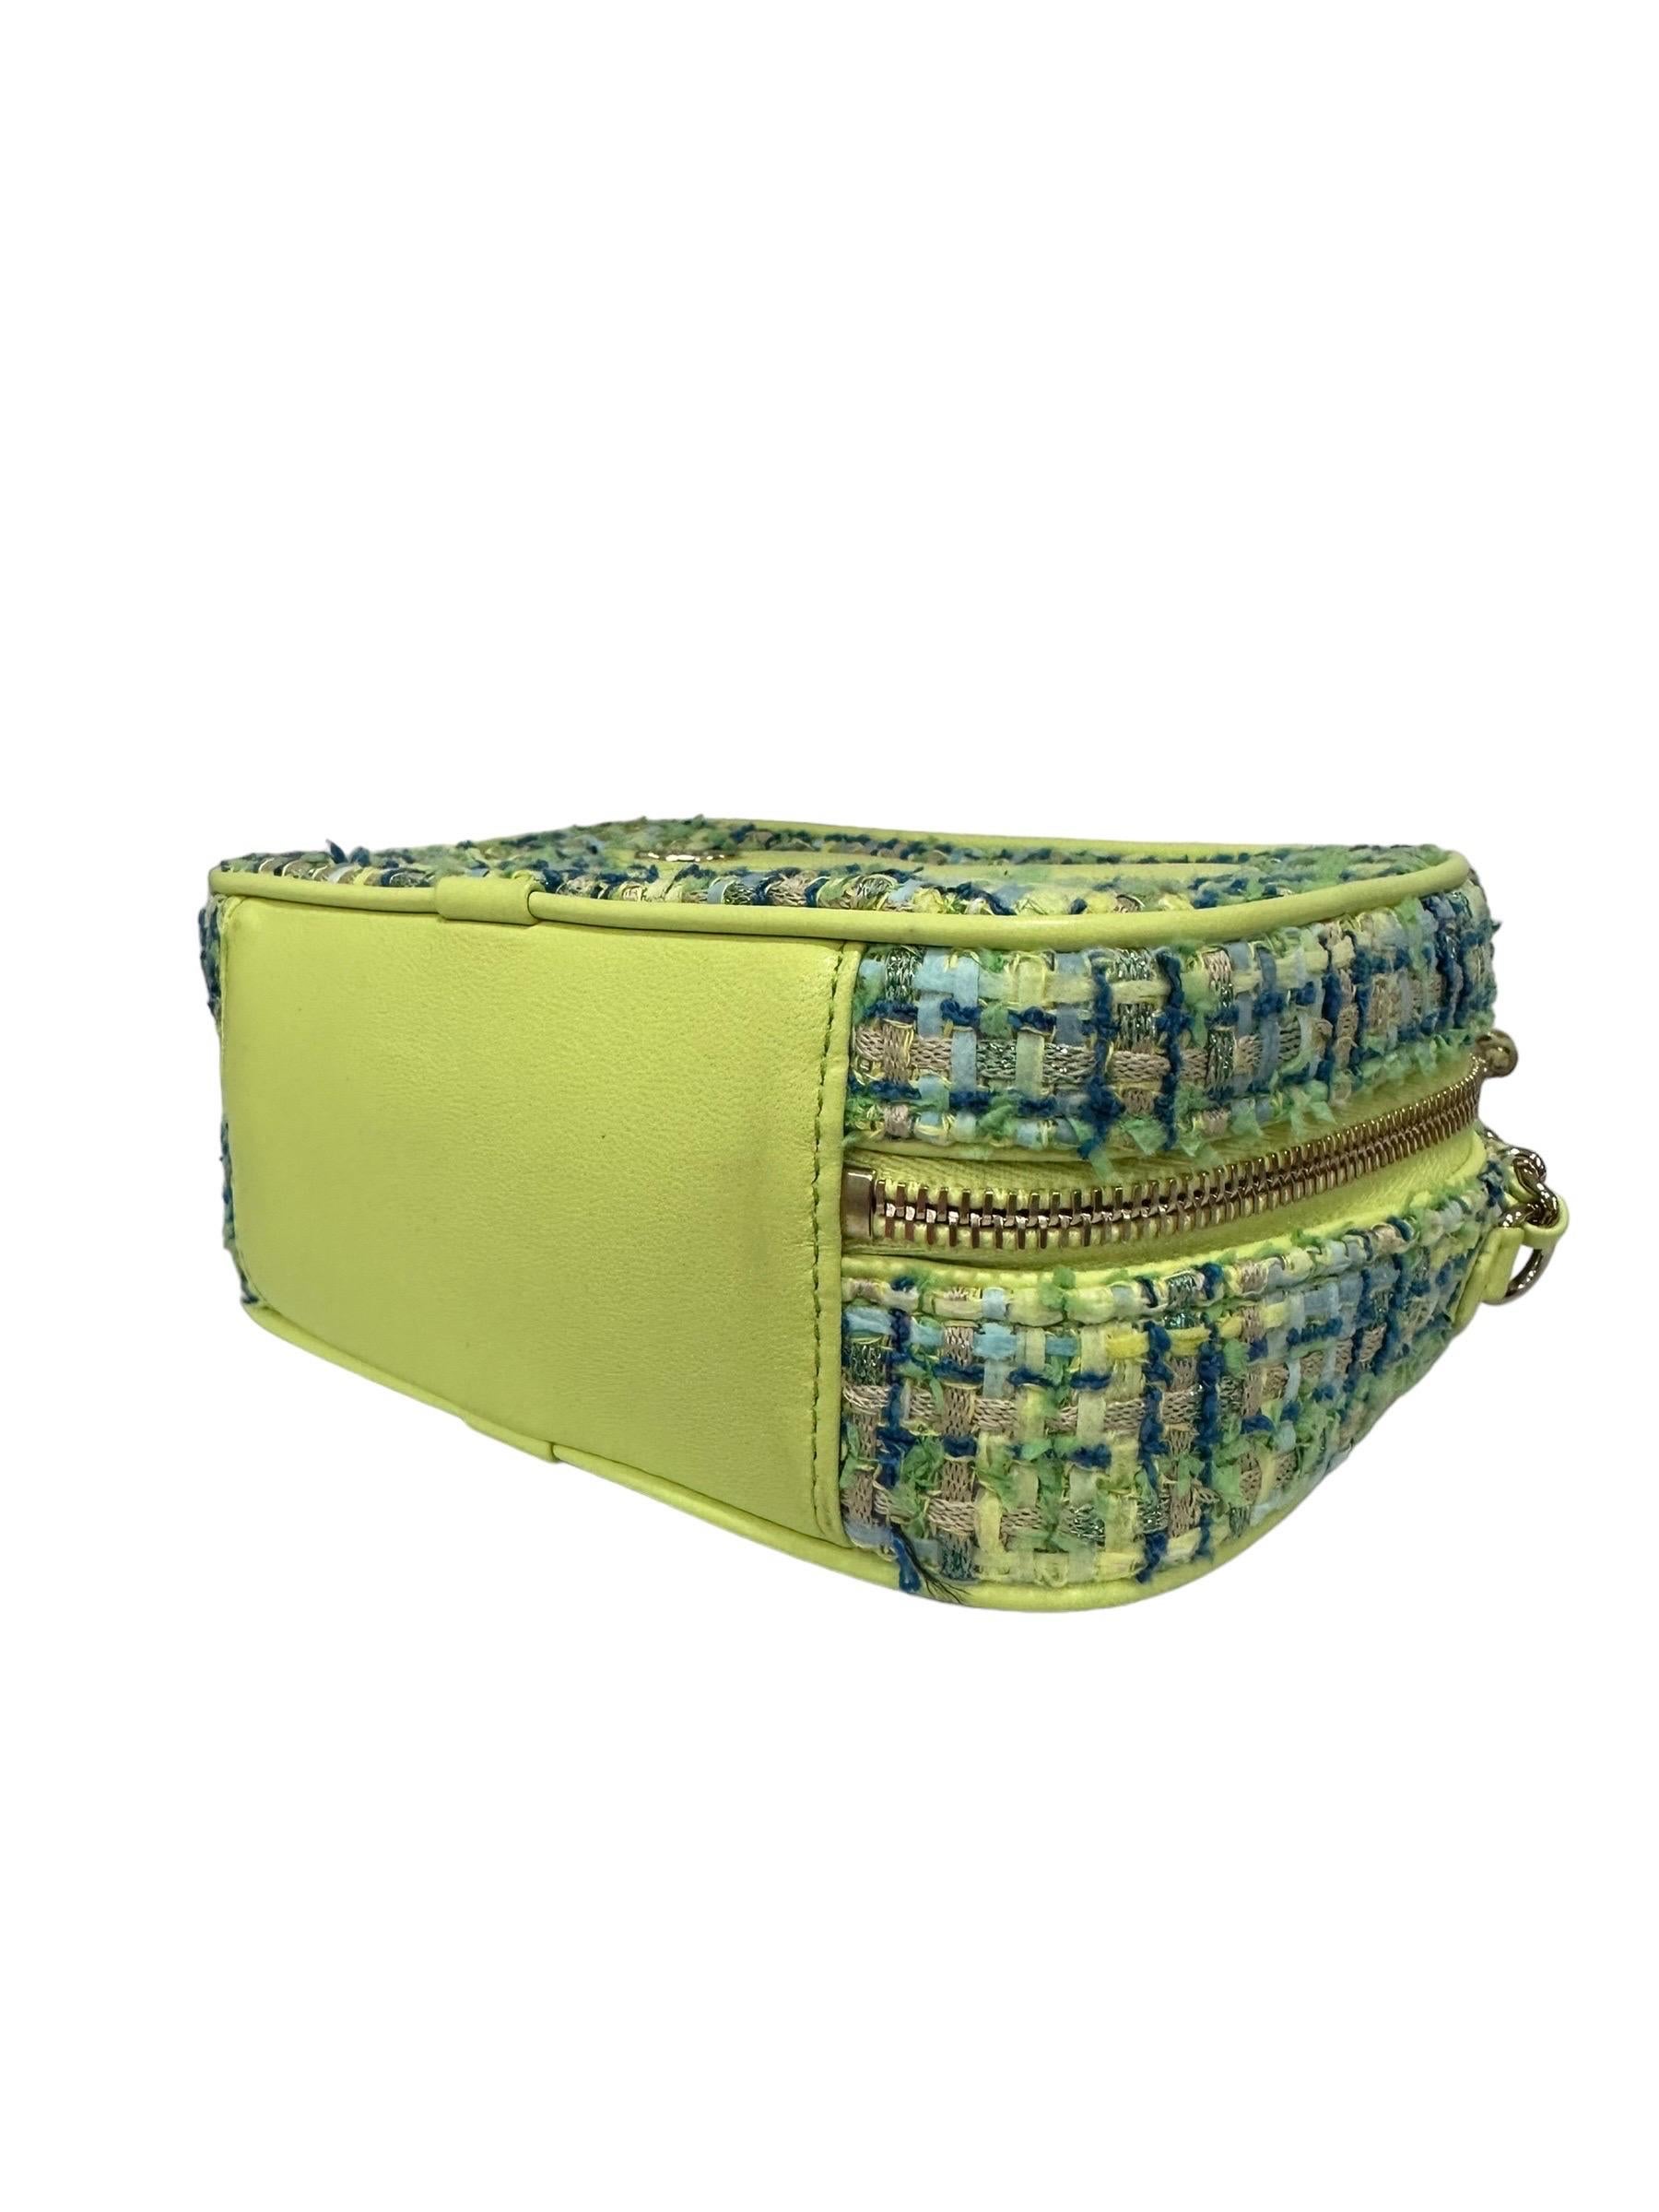 Borsa A Tracolla Chanel Camera Bag Tweed Lime 2019 For Sale 10